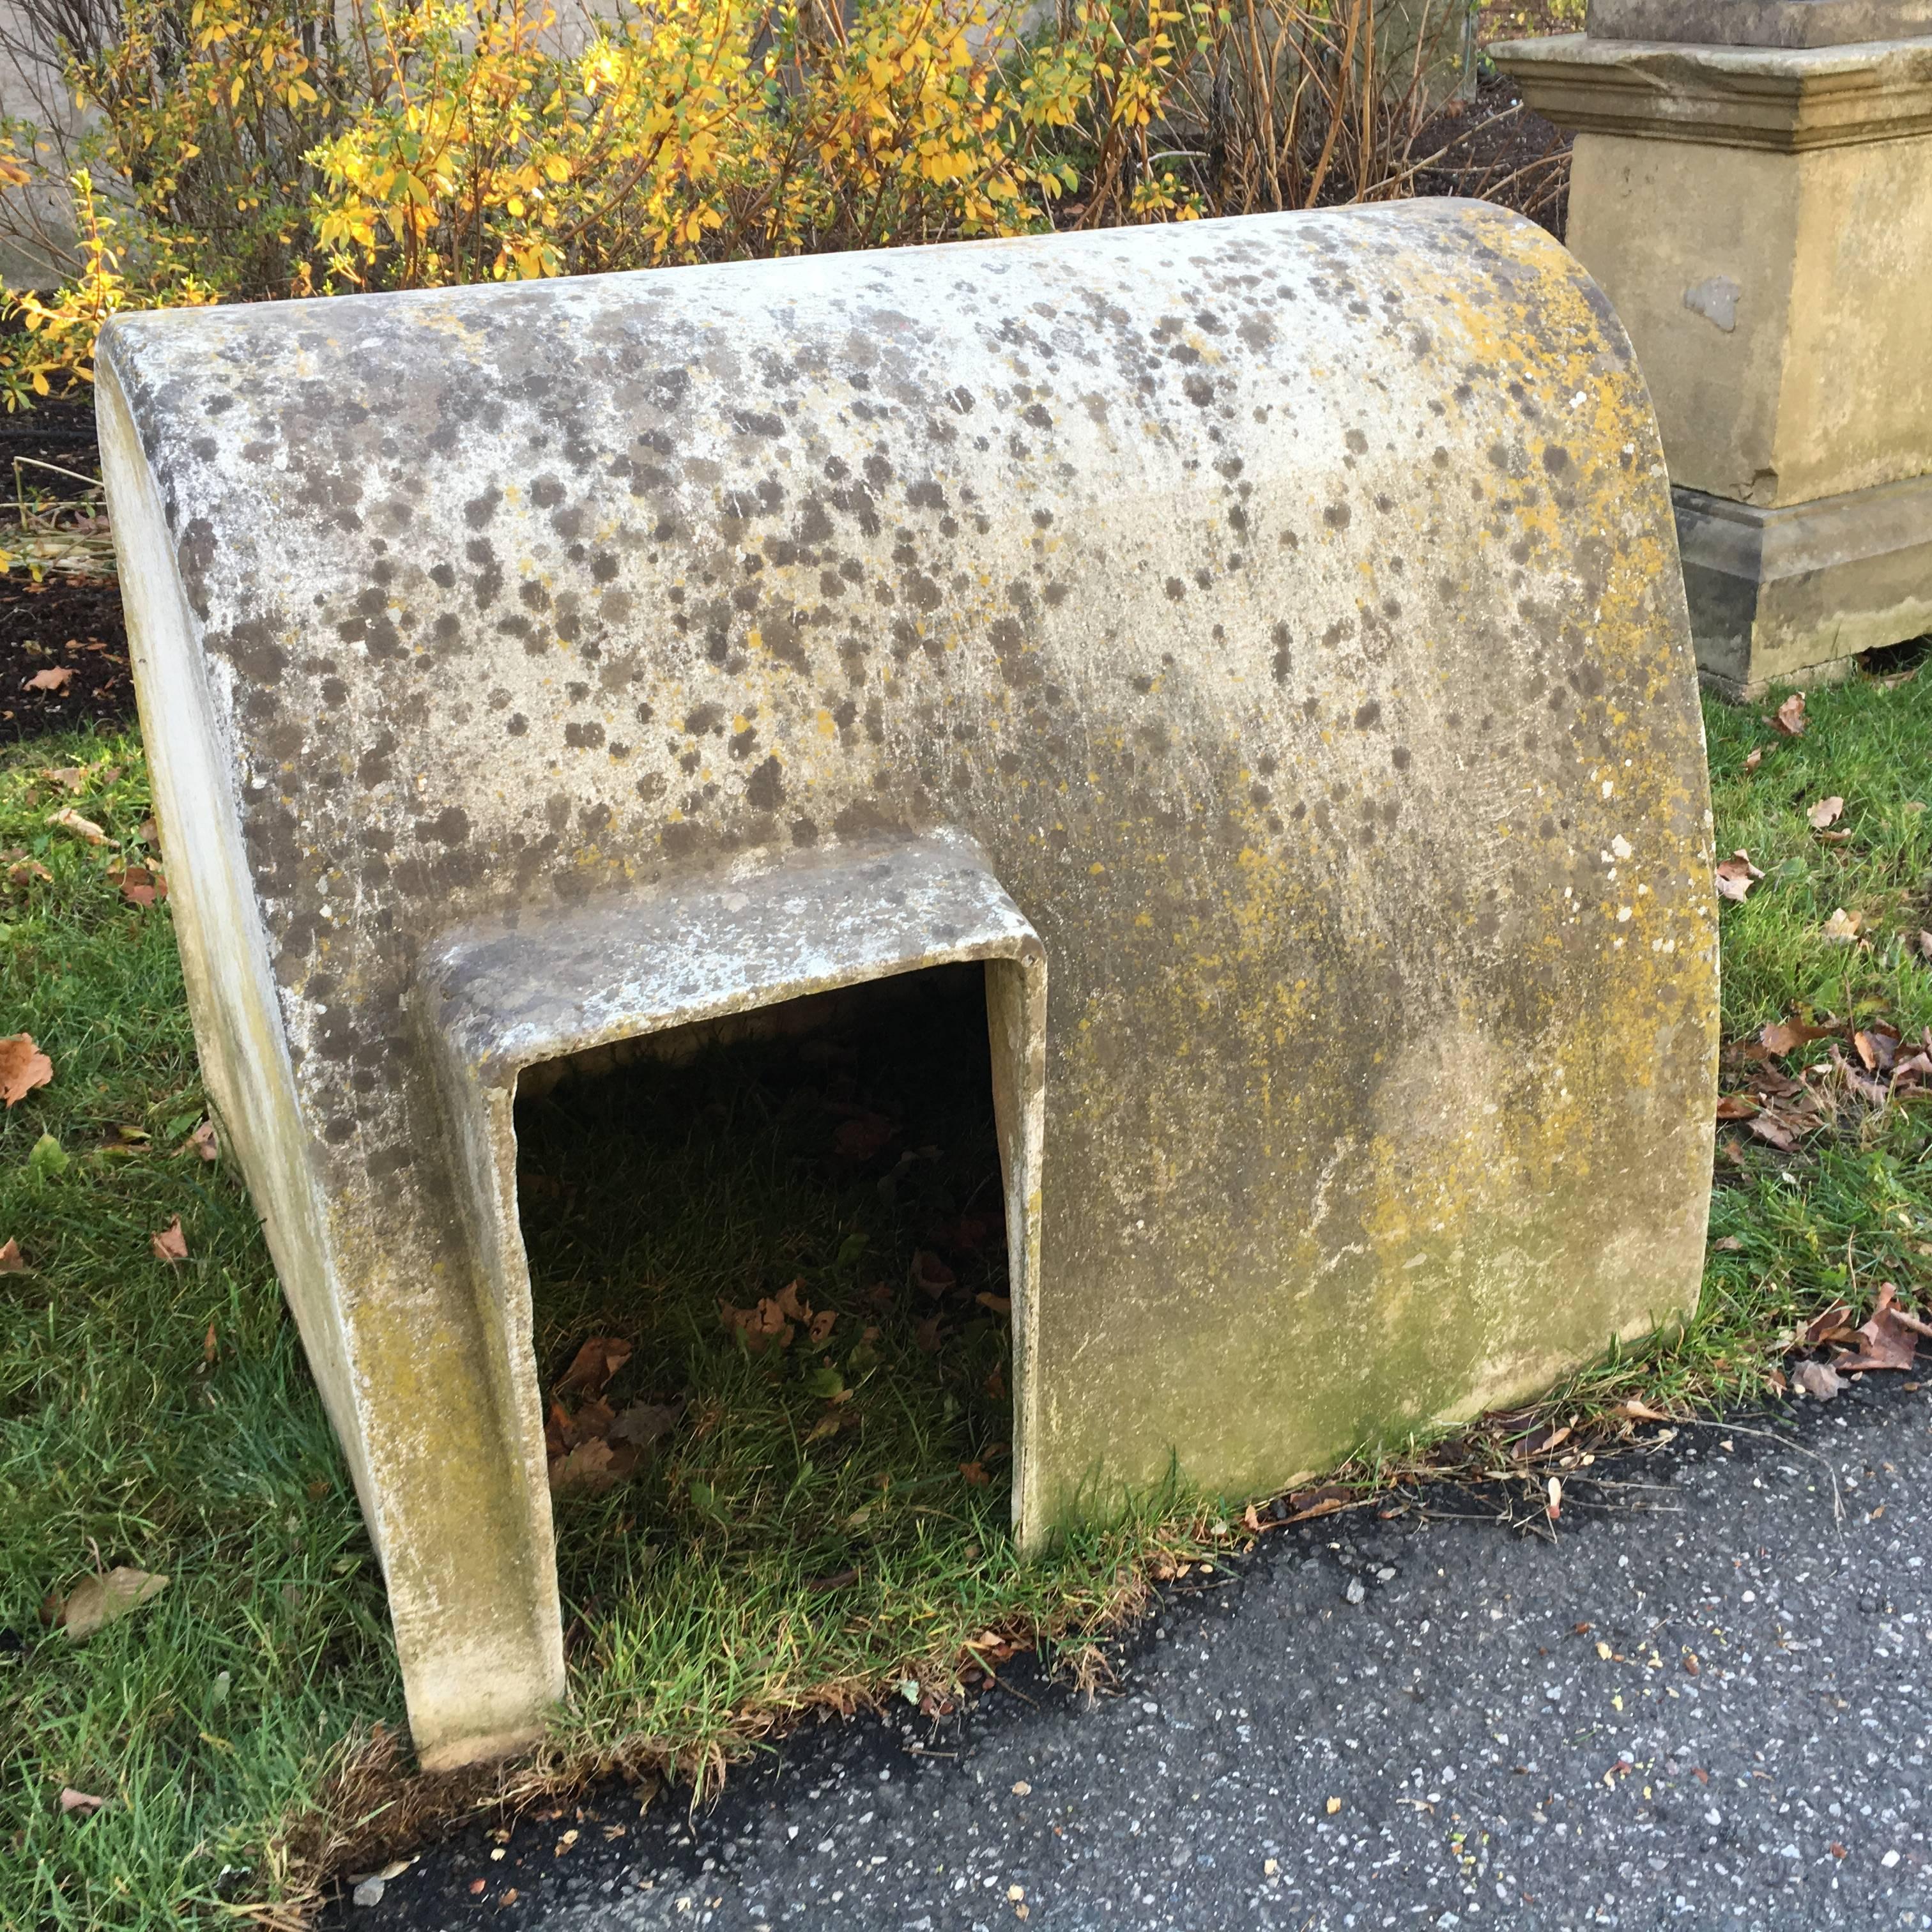 For all you collectors of WIlly Guhl and everyone else looking for a very cool, contemporary doghouse for your darling, this is it! Made of fibrated cement by Eternit of Switzerland in the 1960s, and with incised production numbers, this